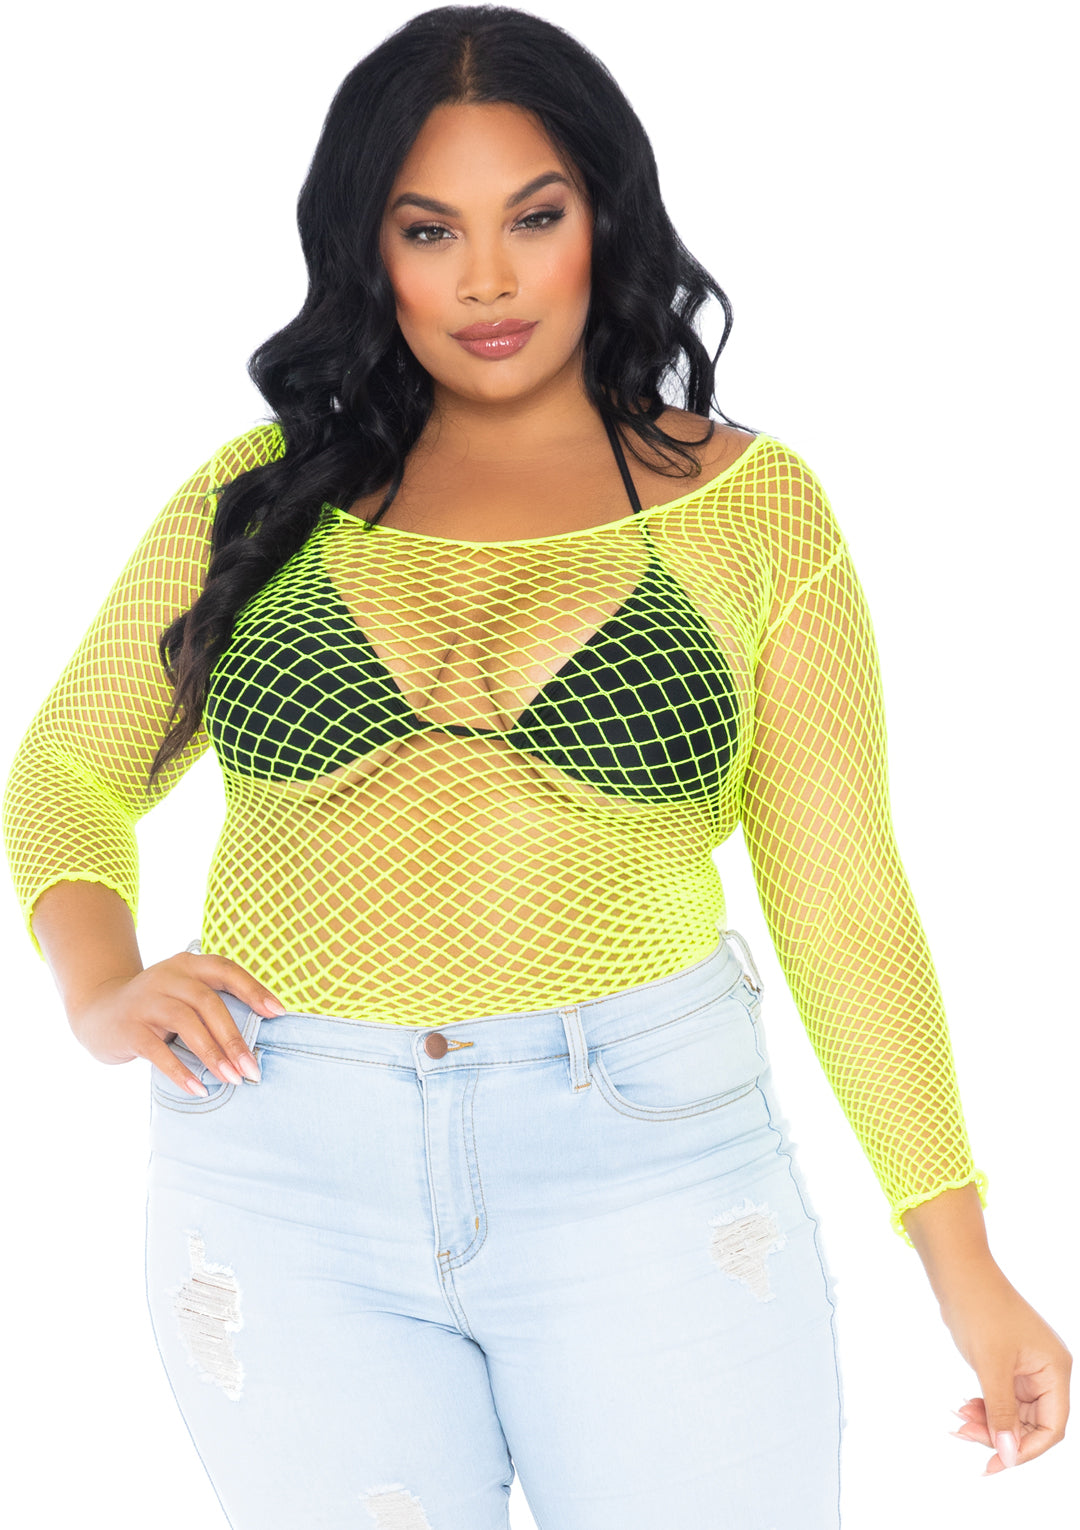 Lovely Wholesale women fishnet shirt At An Amazing And Affordable Price 